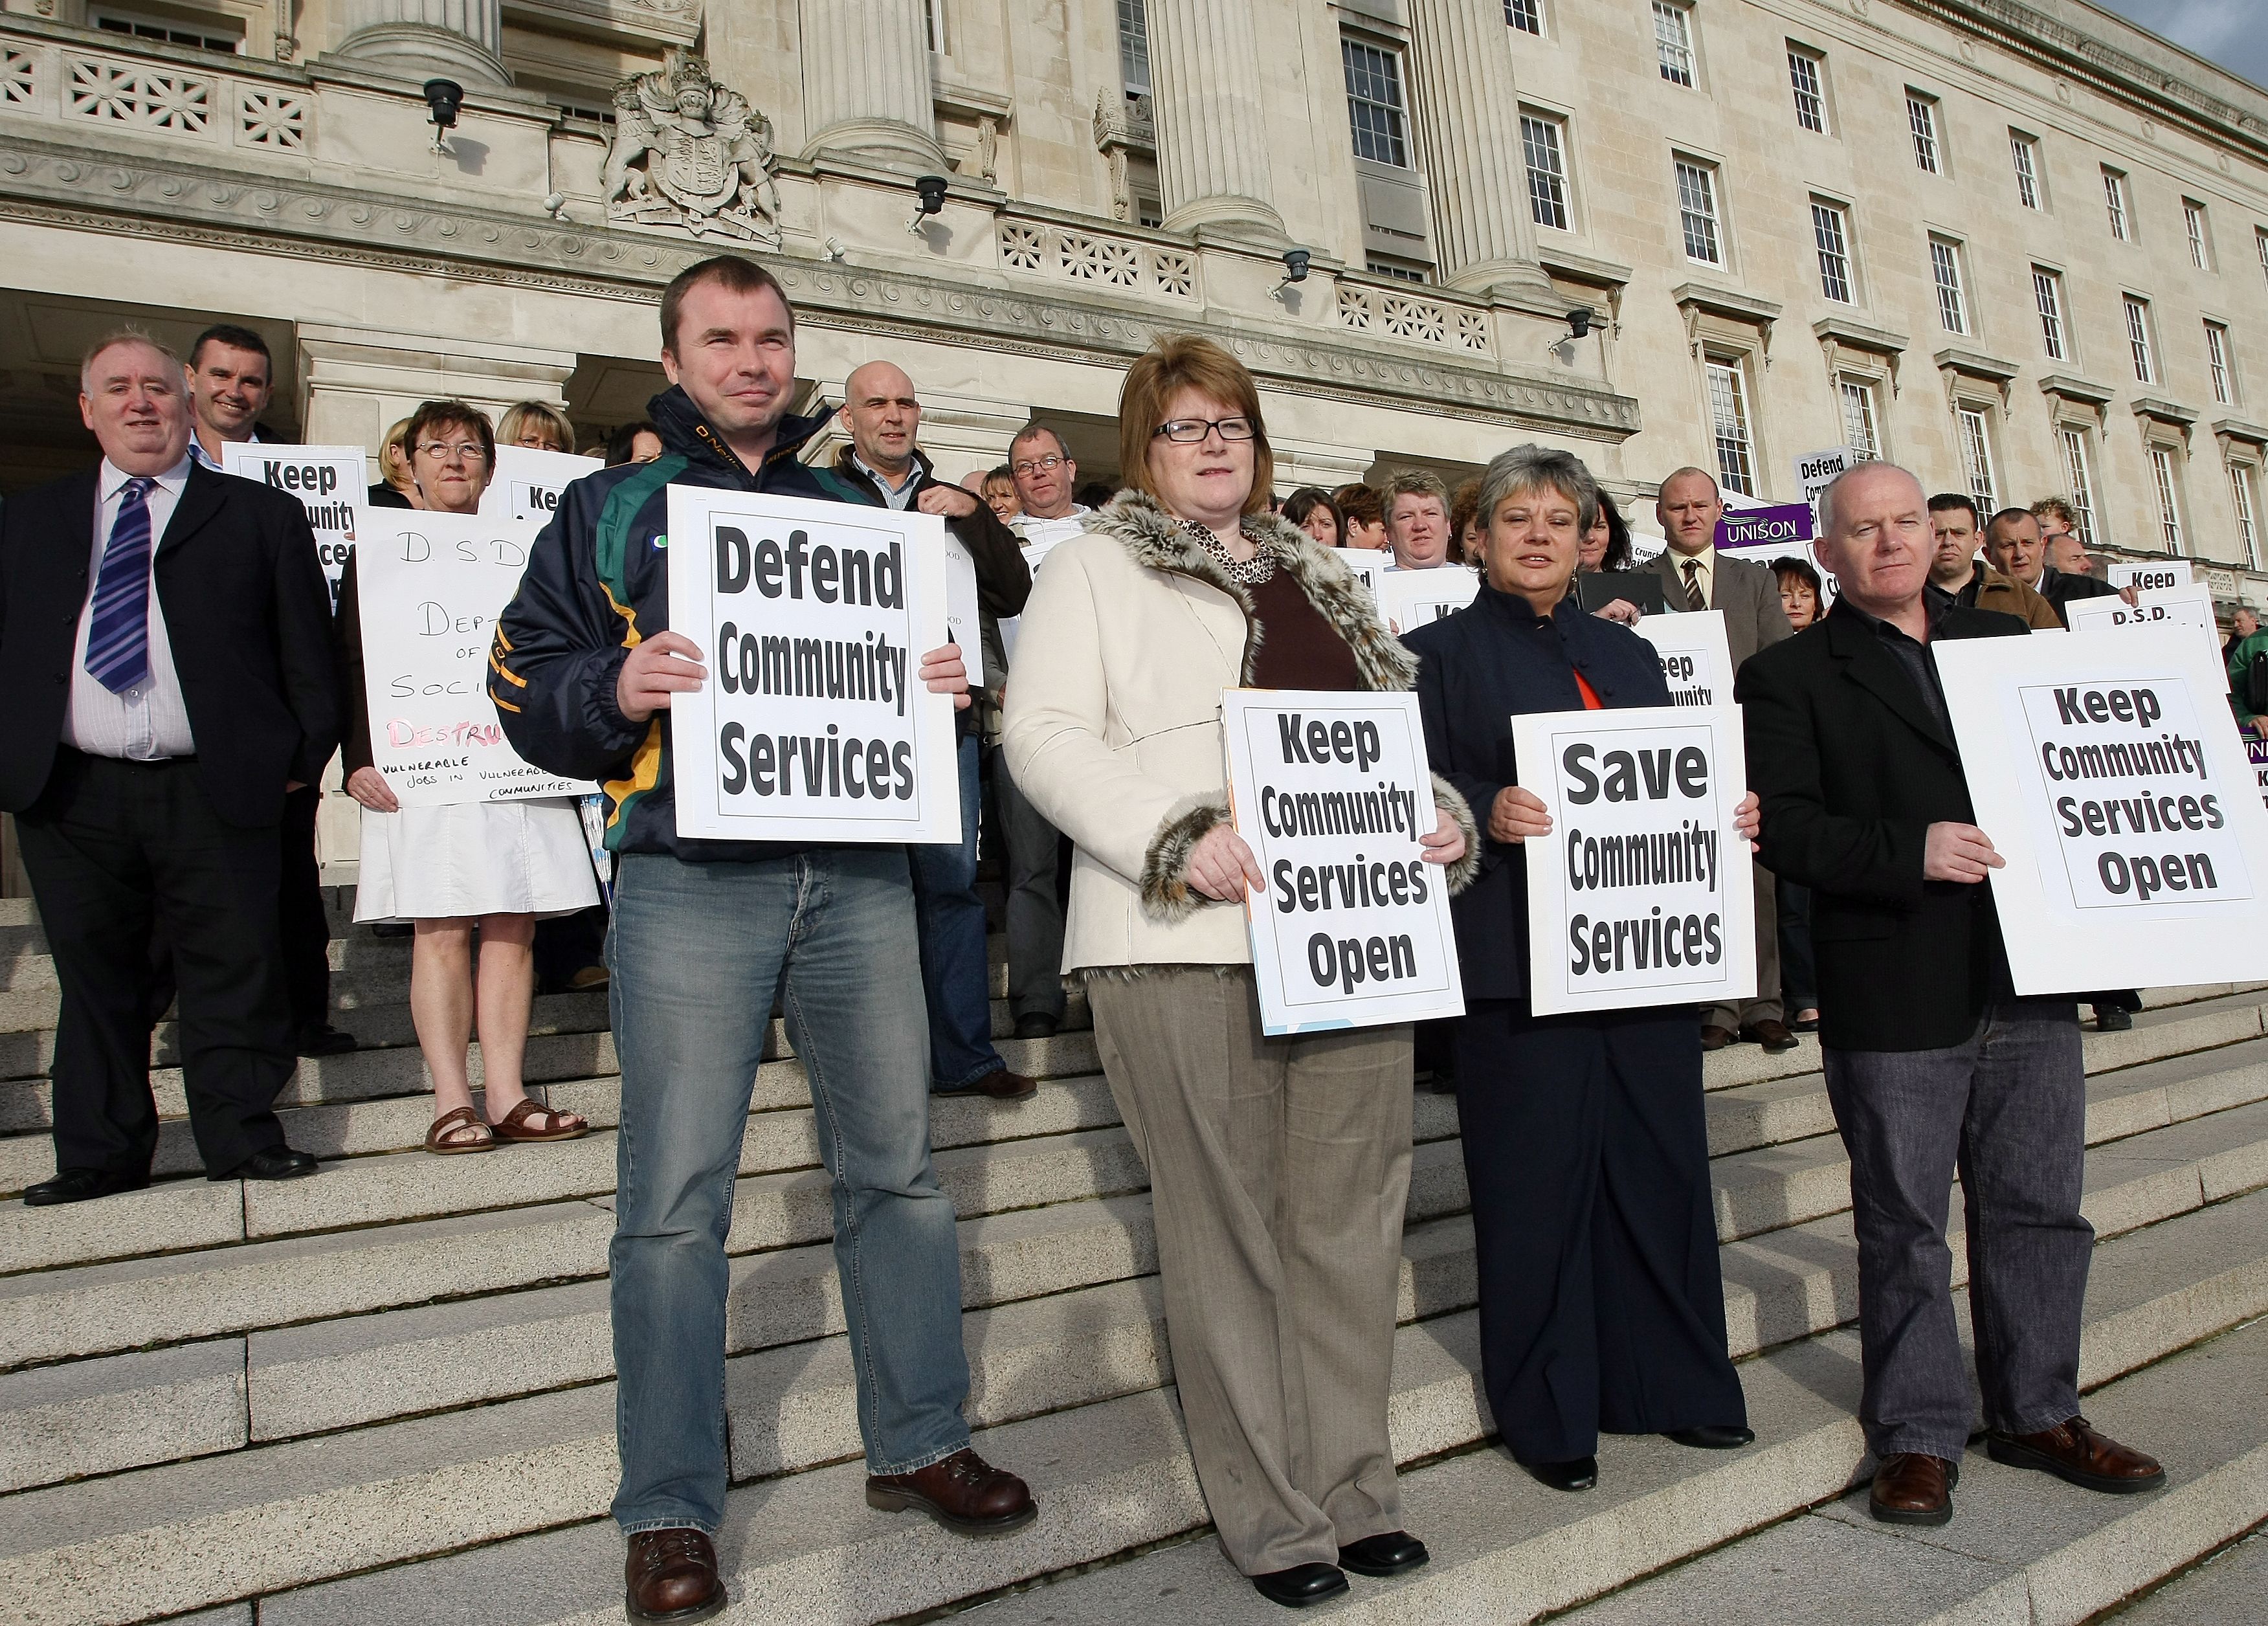 PROTEST: Outside the non-functioning Stormont, people express their concern